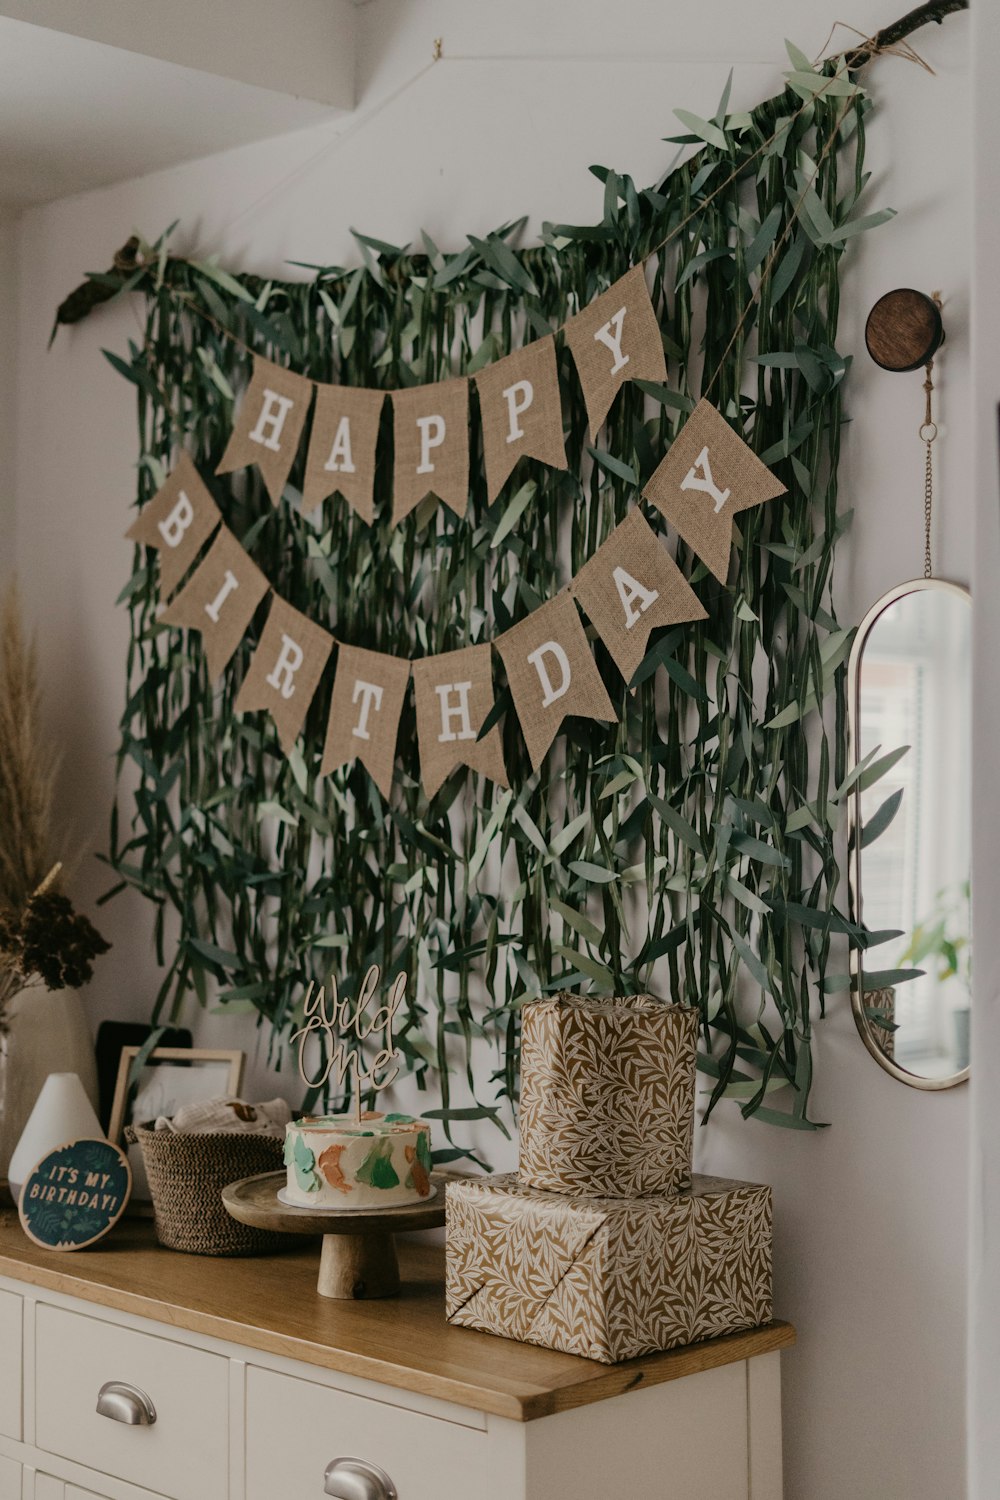 a happy birthday banner hanging on a wall